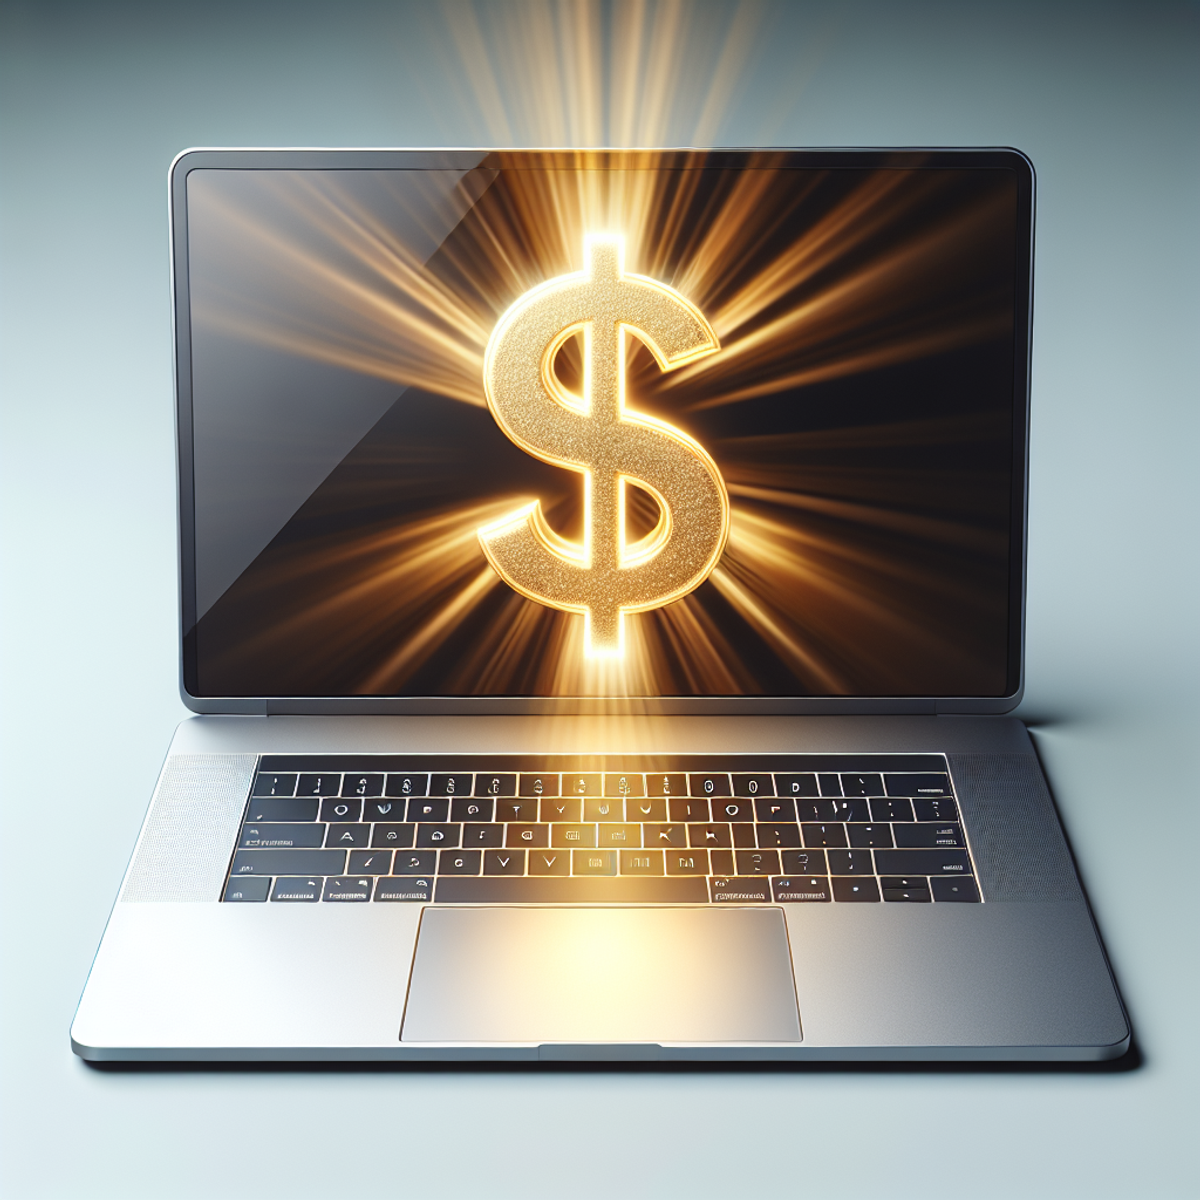 Alt text: A silver laptop with a glowing golden dollar sign on the screen.